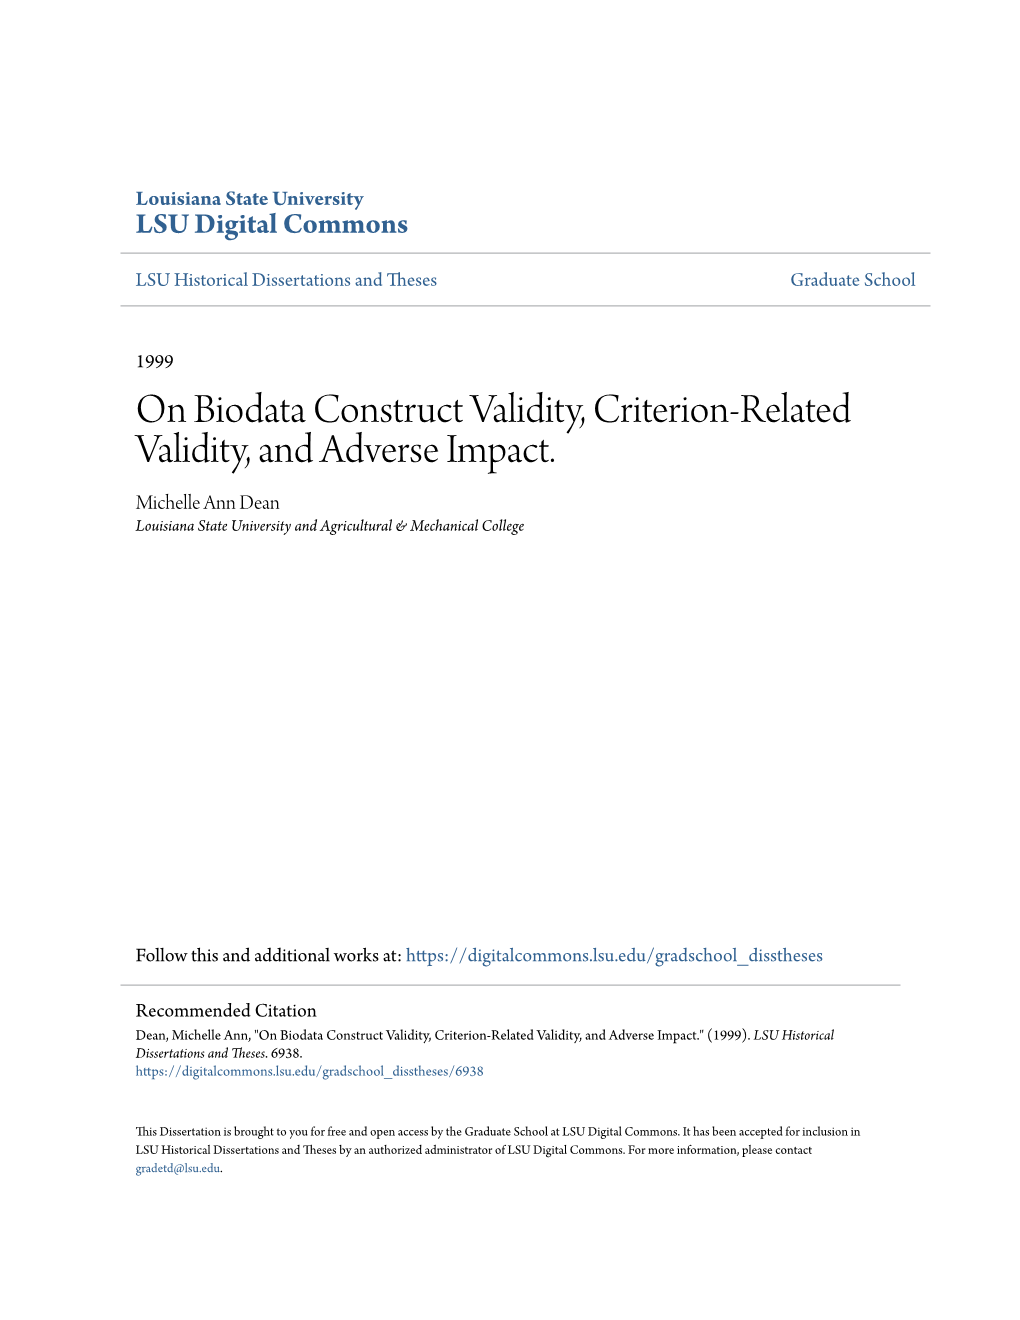 On Biodata Construct Validity, Criterion-Related Validity, and Adverse Impact